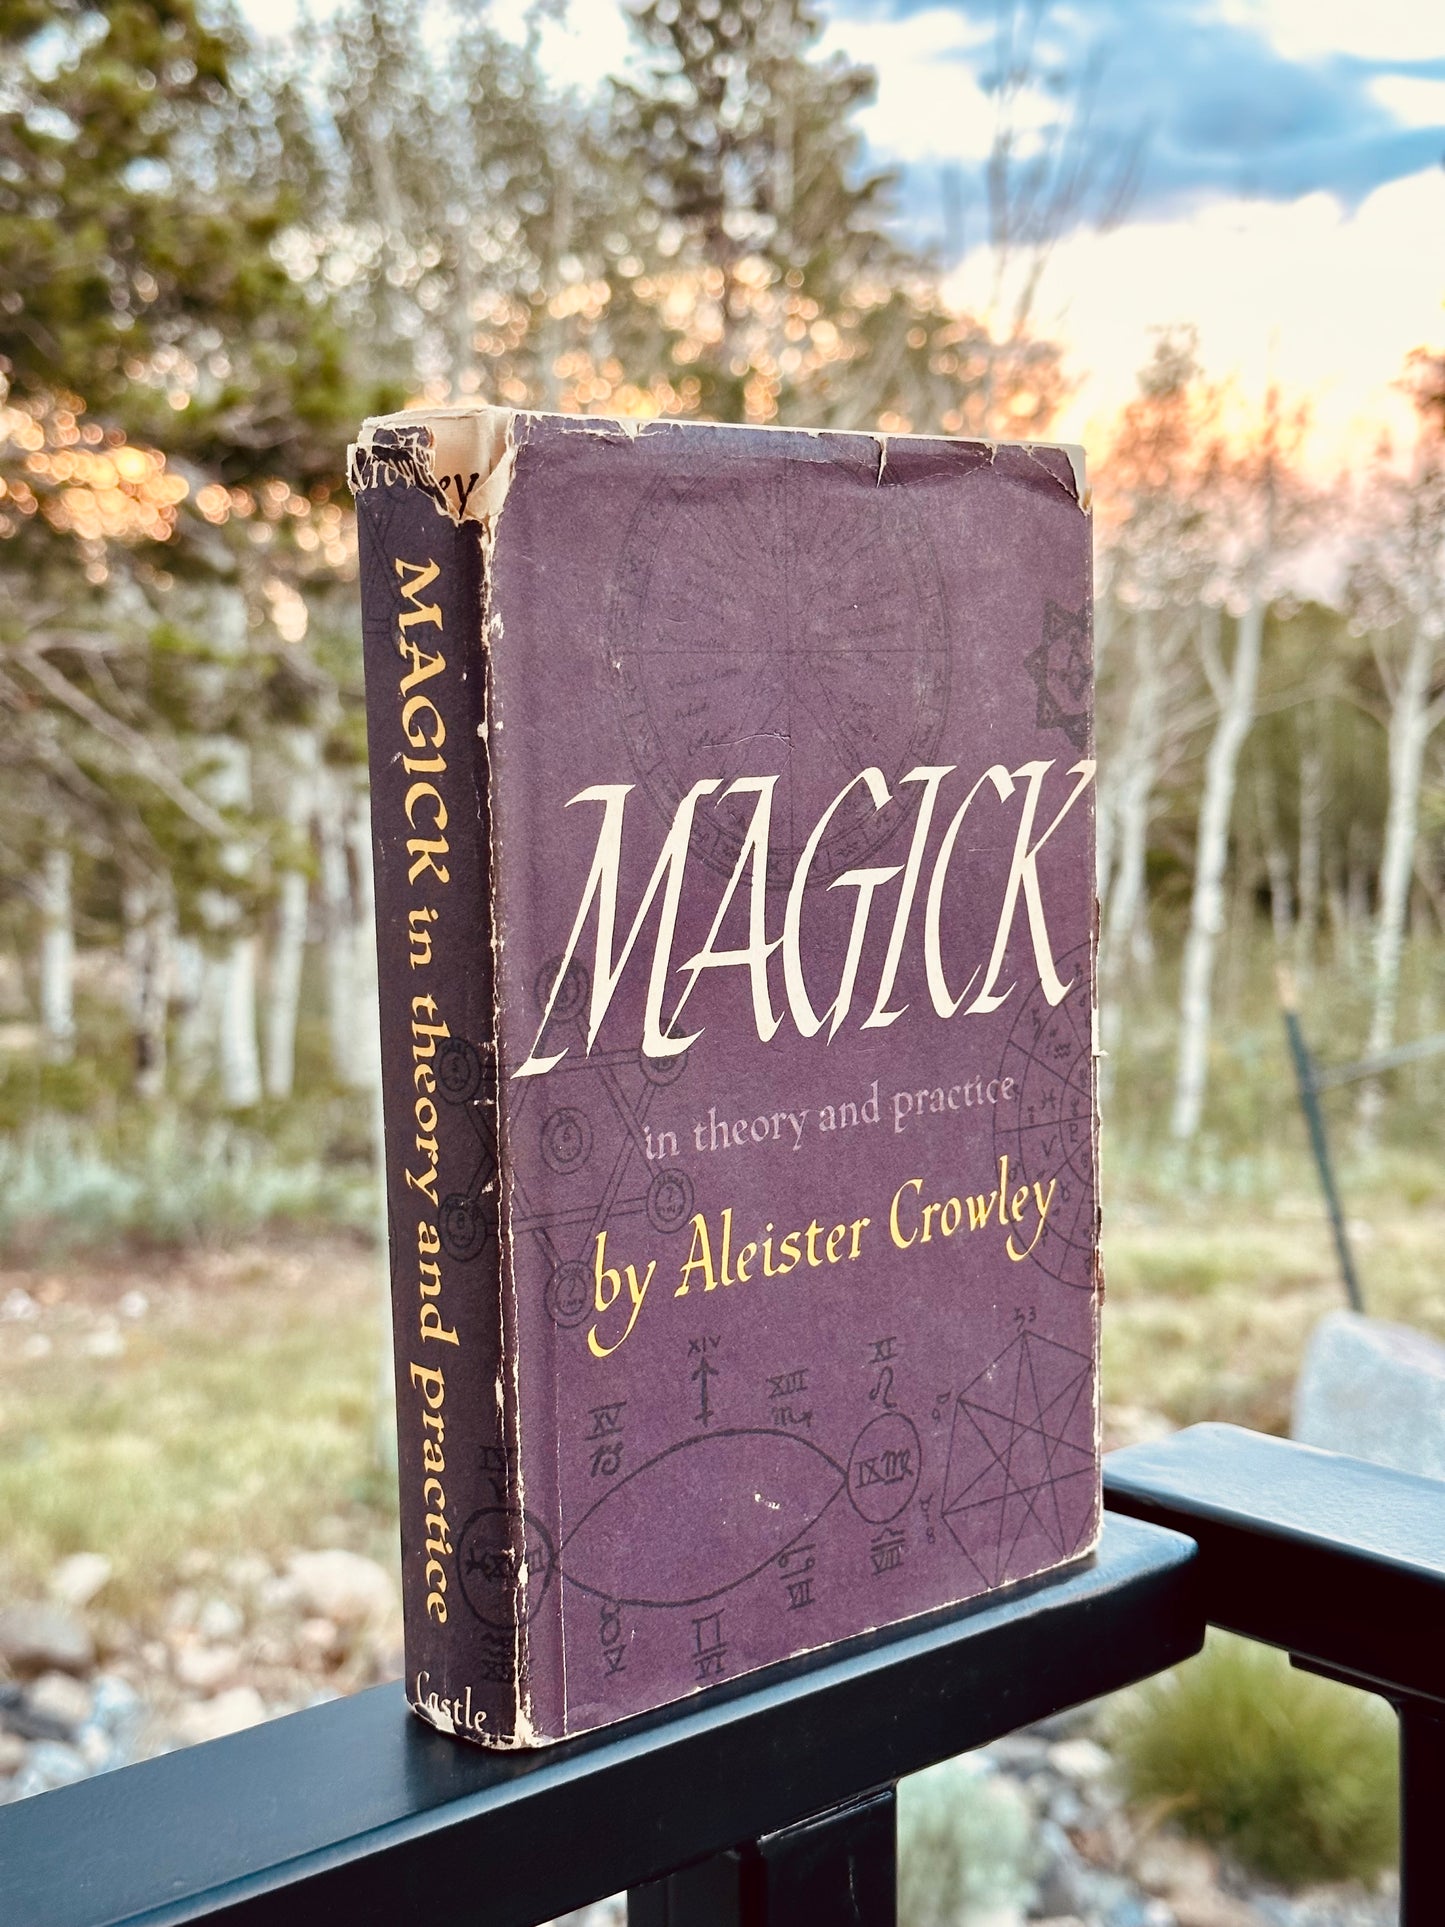 Magick In Theory and Practice by Aleister Crowley